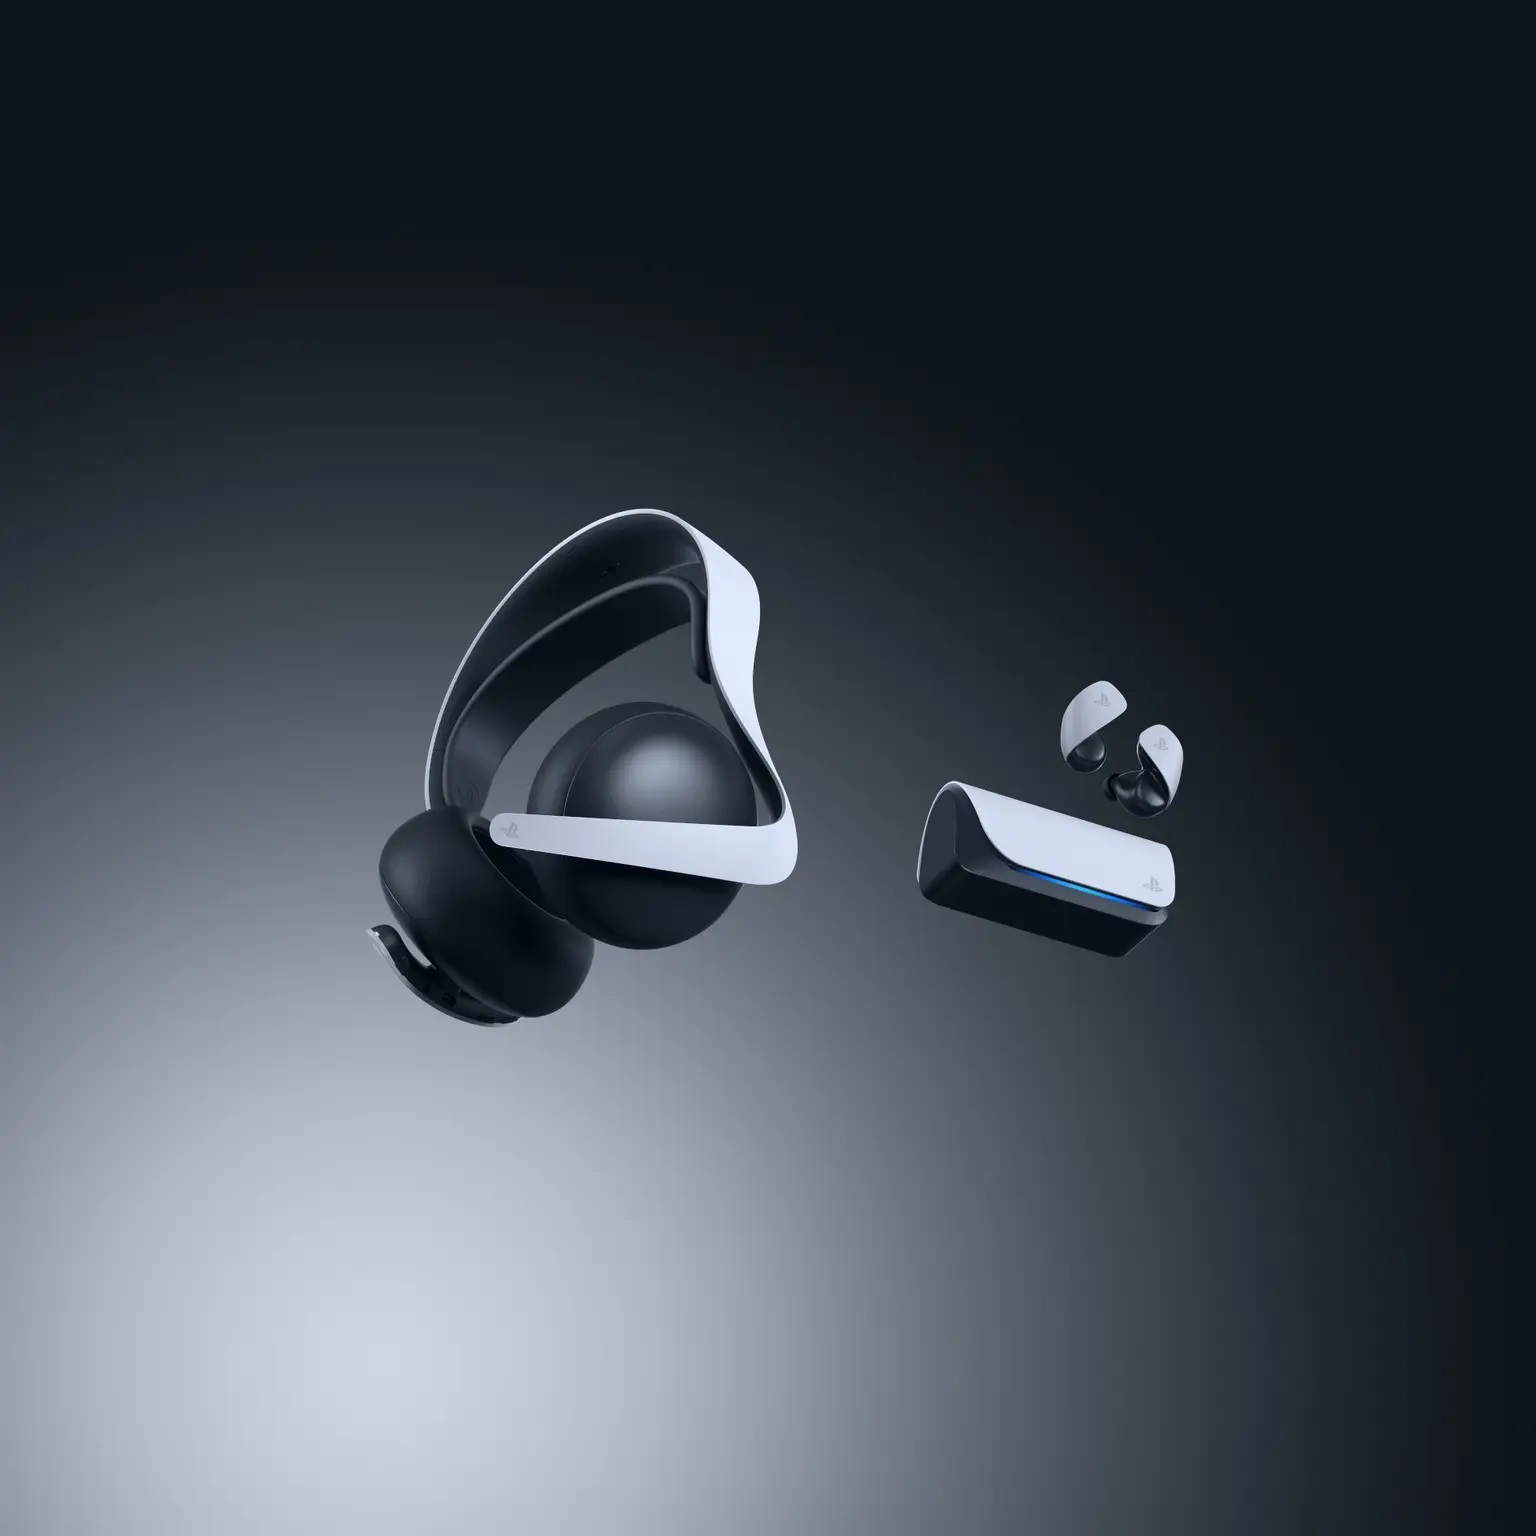 PlayStation Wireless Earbuds launch in December